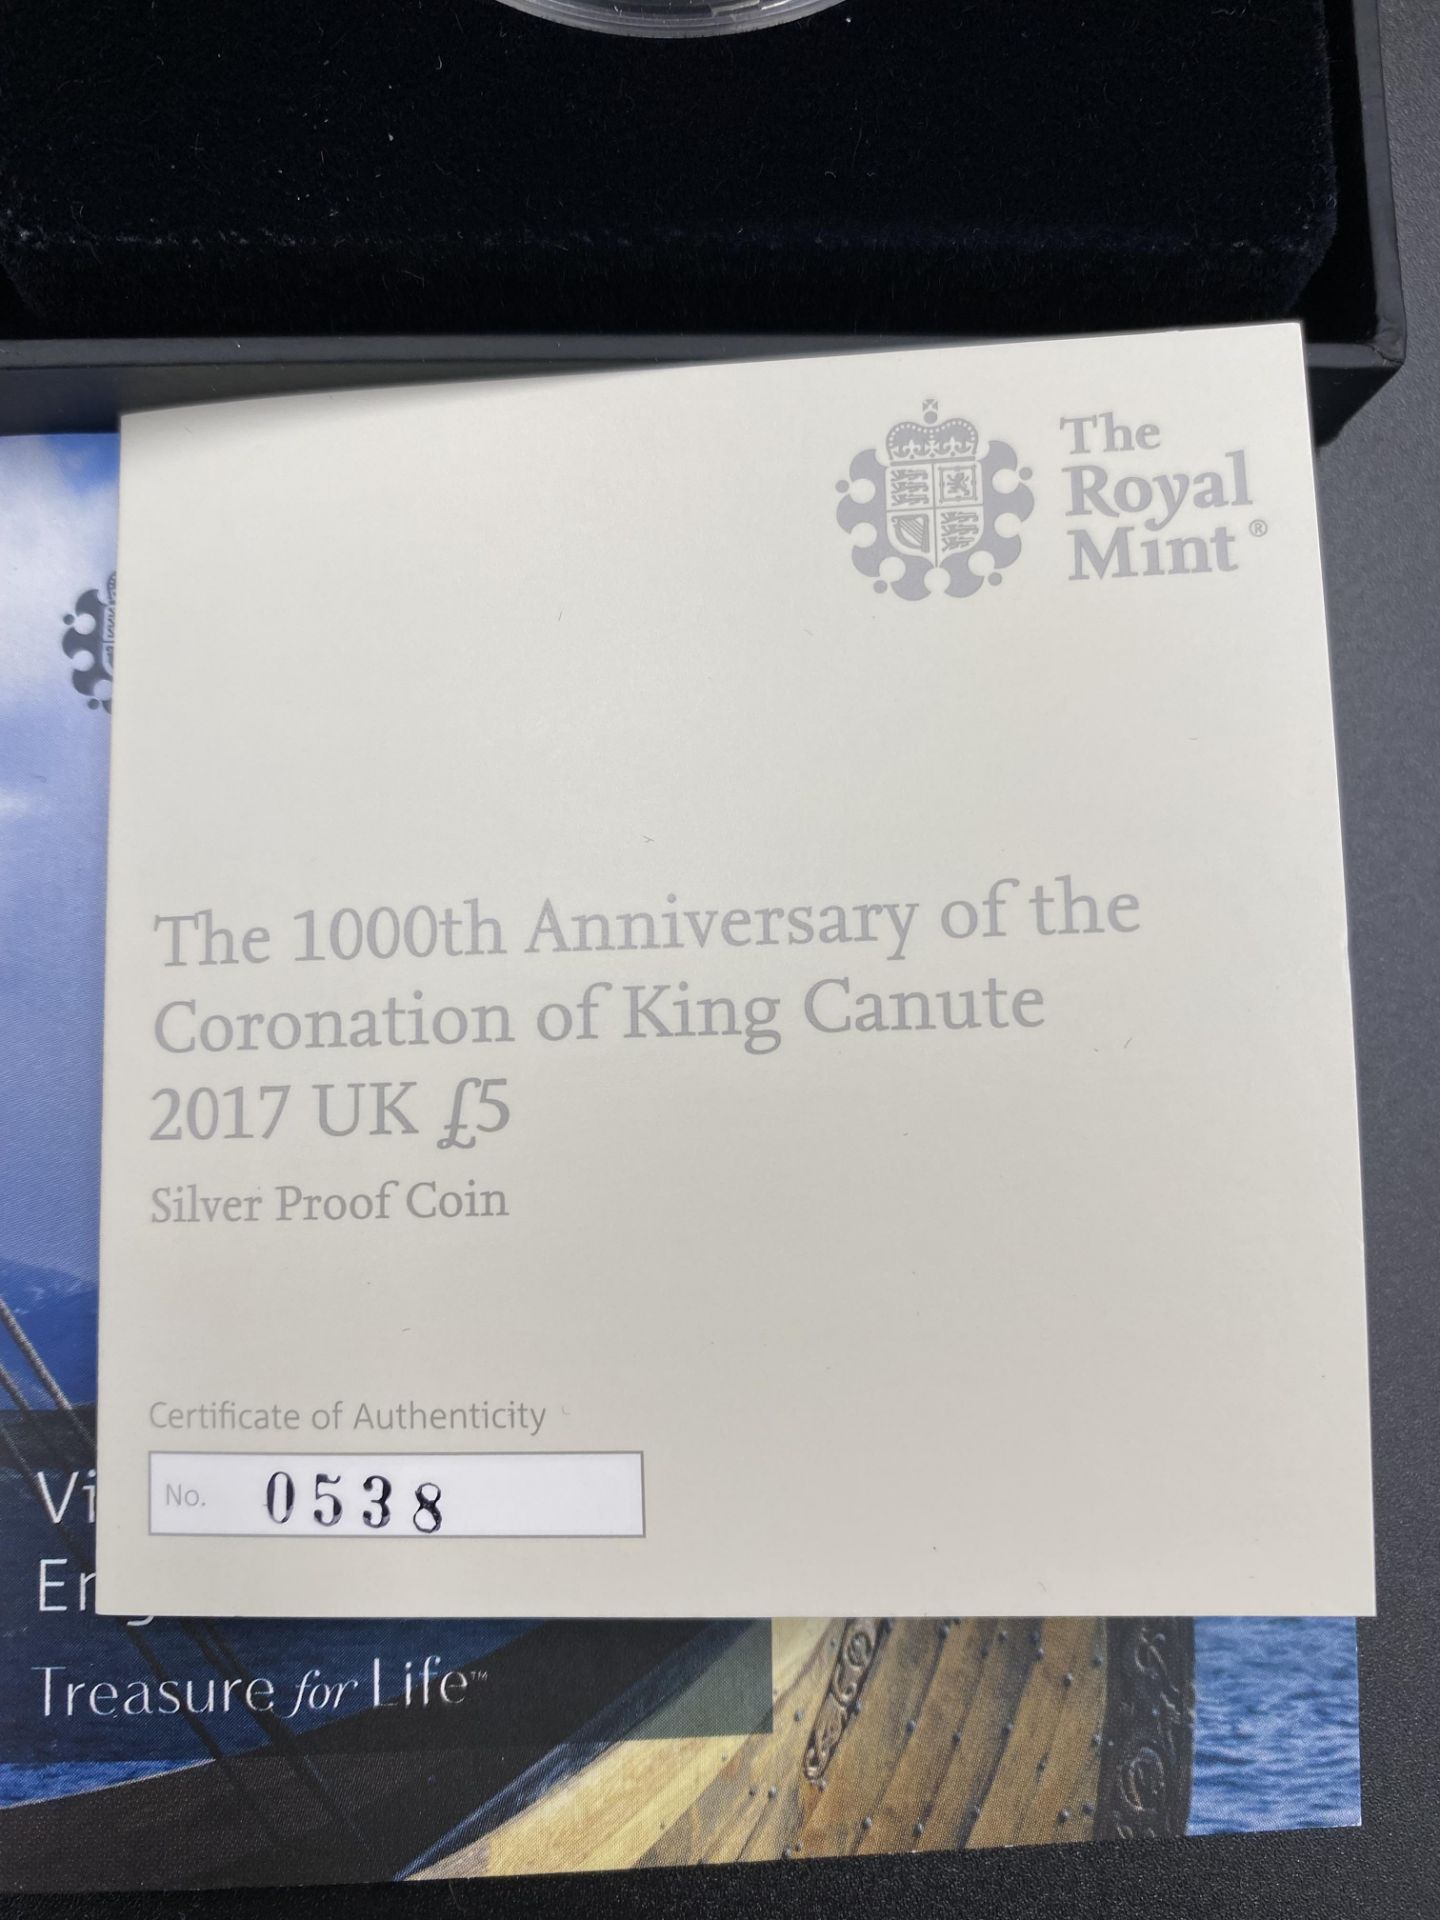 Royal Mint 1000th Anniversary of the Coronation of King Canute, 2017 £5 silver proof coin - Image 4 of 4